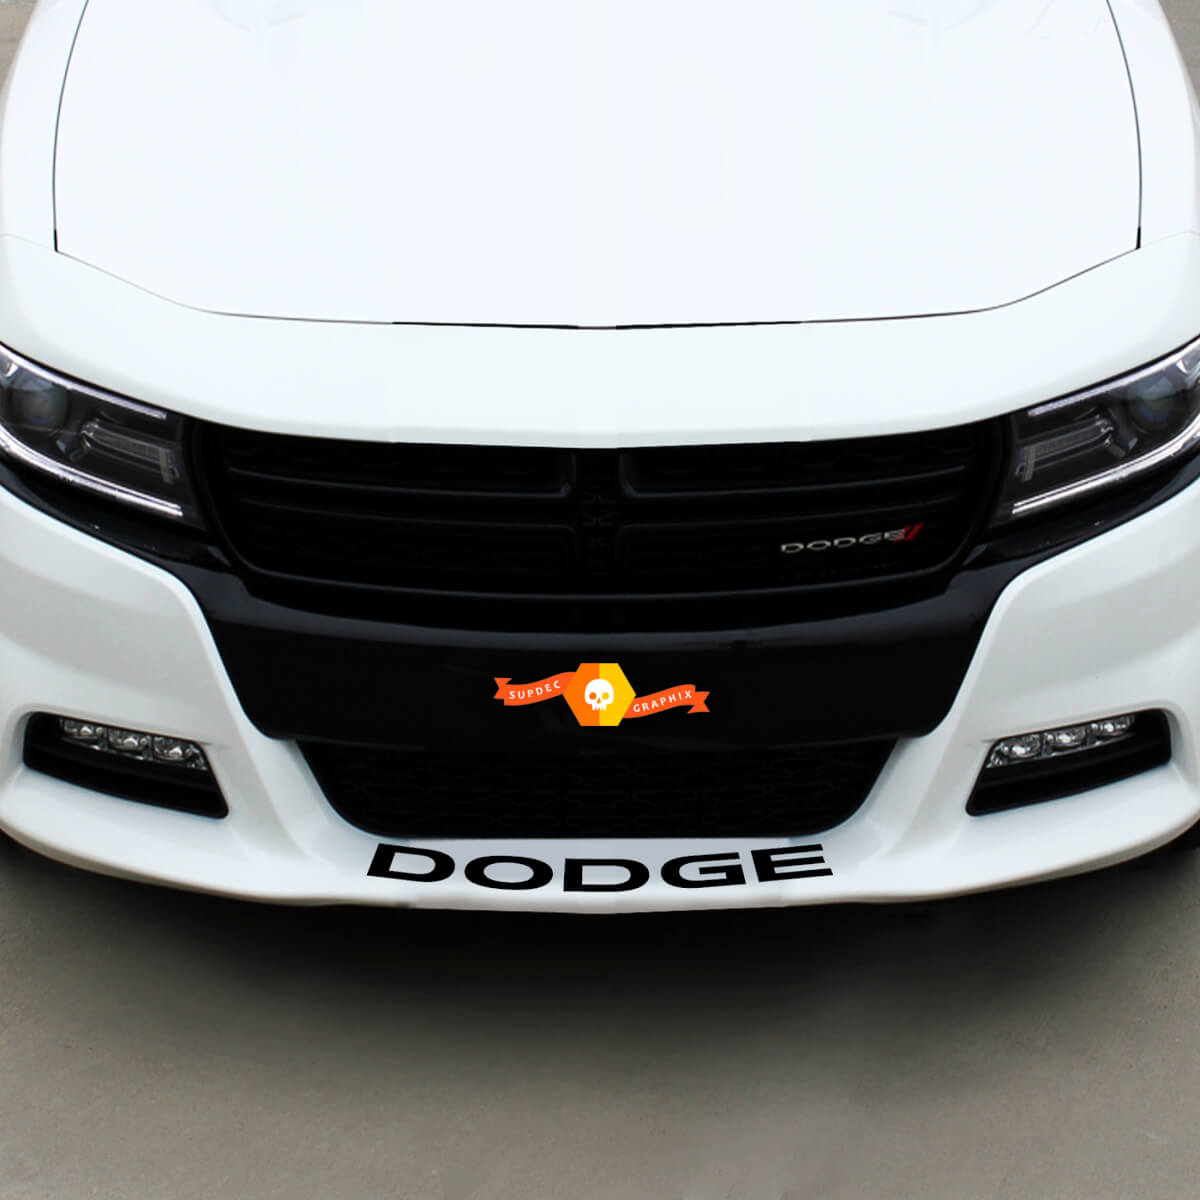 Dodge front Spoiler Decal Sticker graphics fits to all models